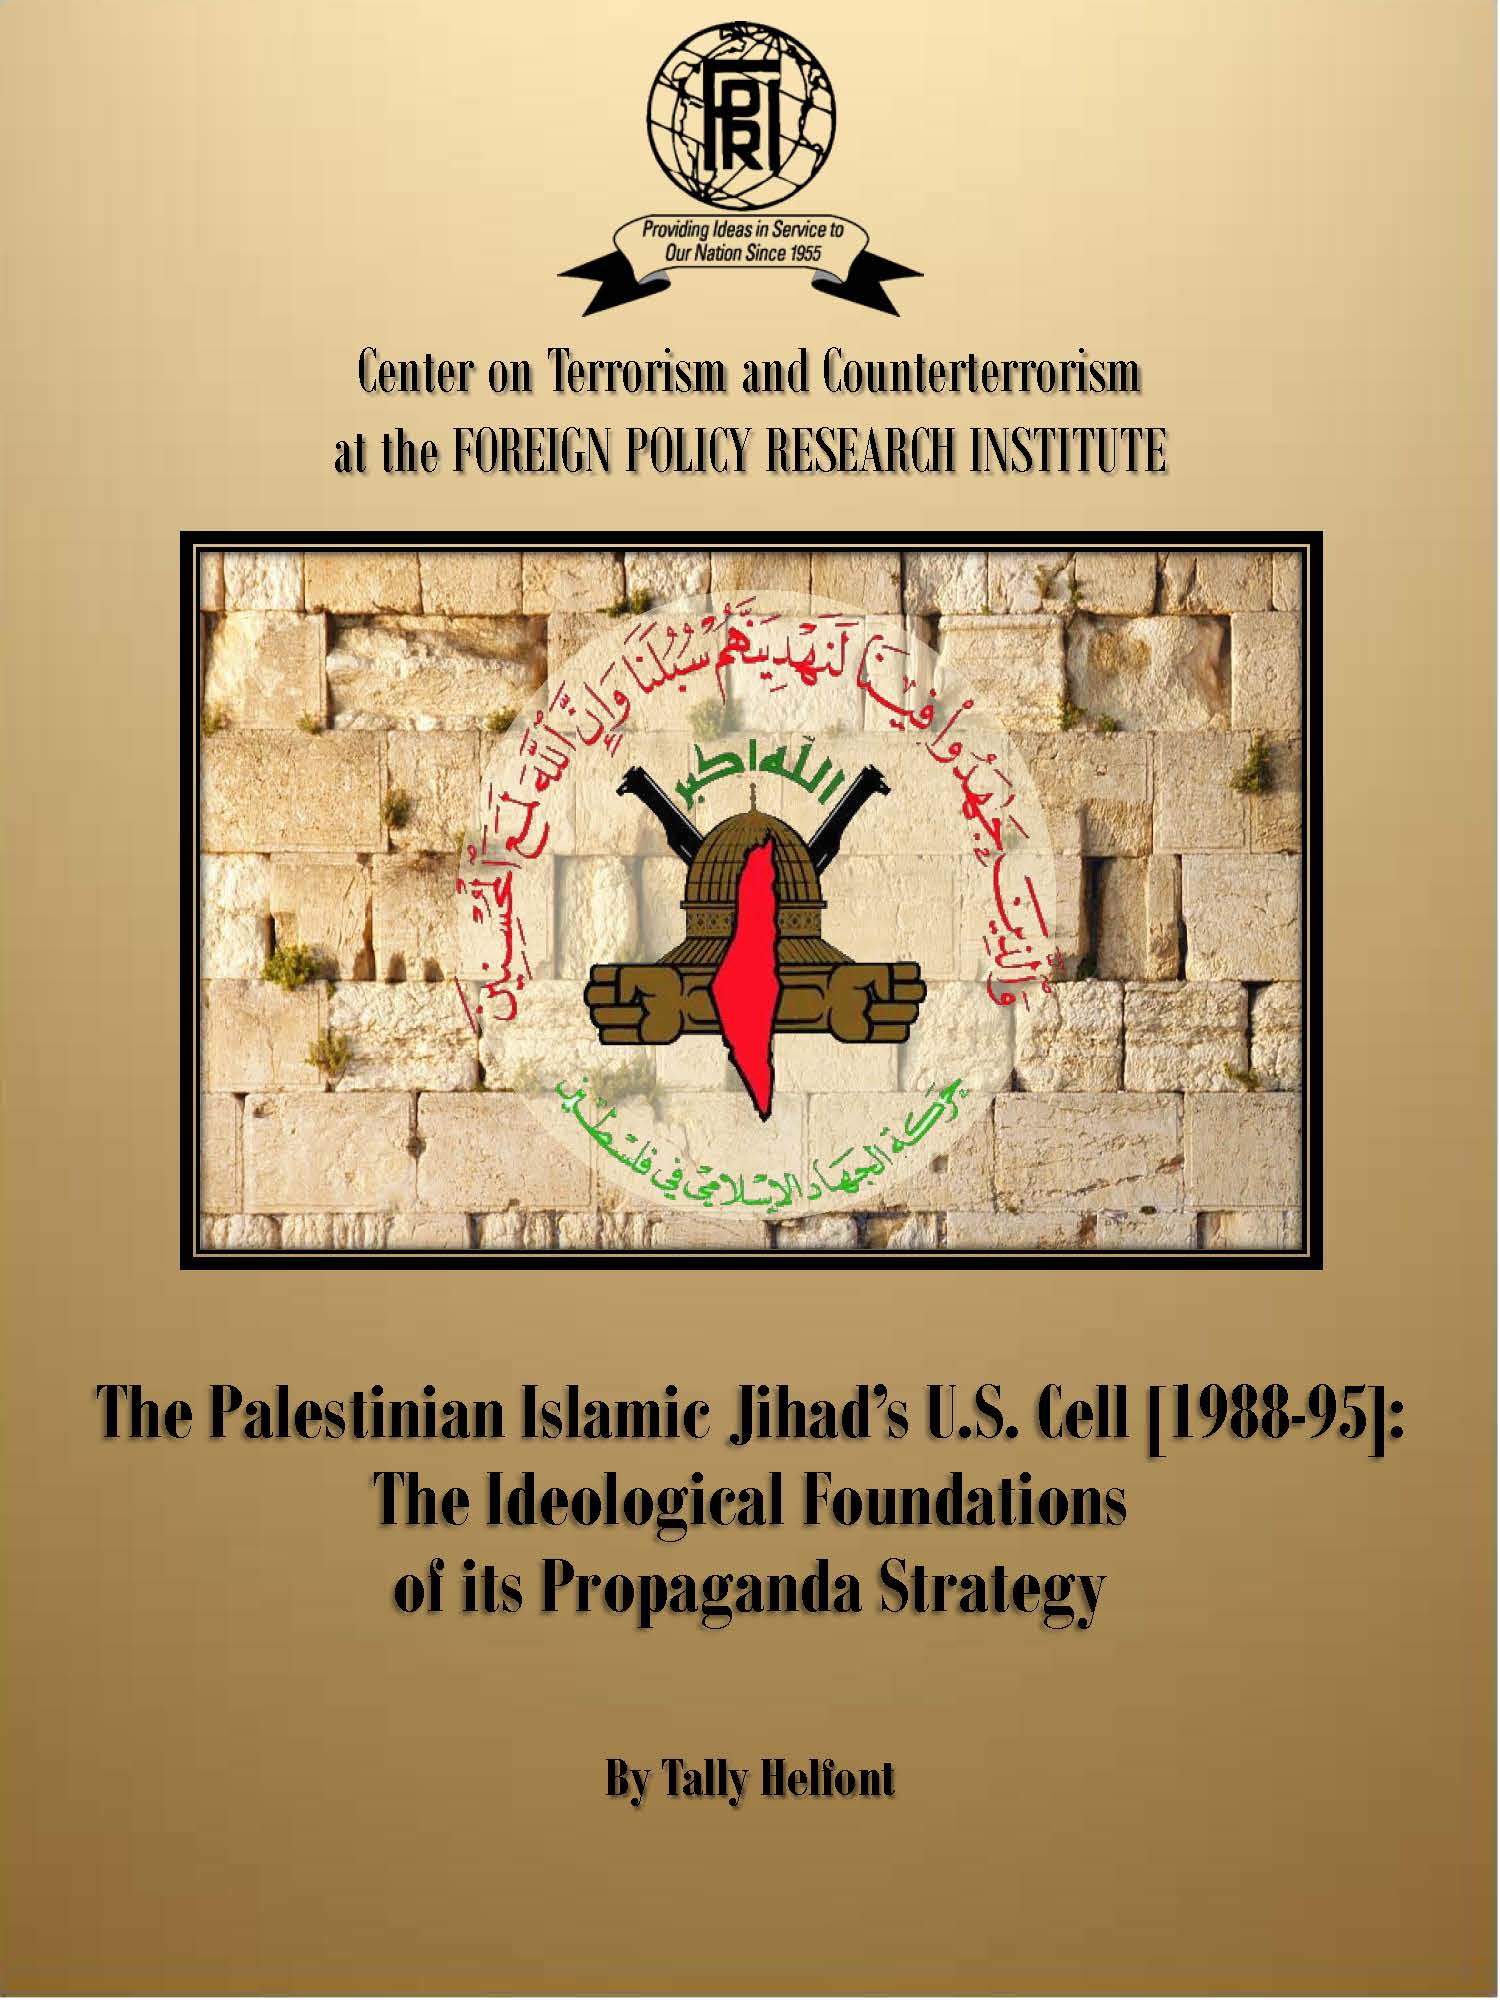 The Palestinian Islamic Jihad’s U.S. Cell [1988–95]: the Ideological Foundations of Its Propaganda Strategy